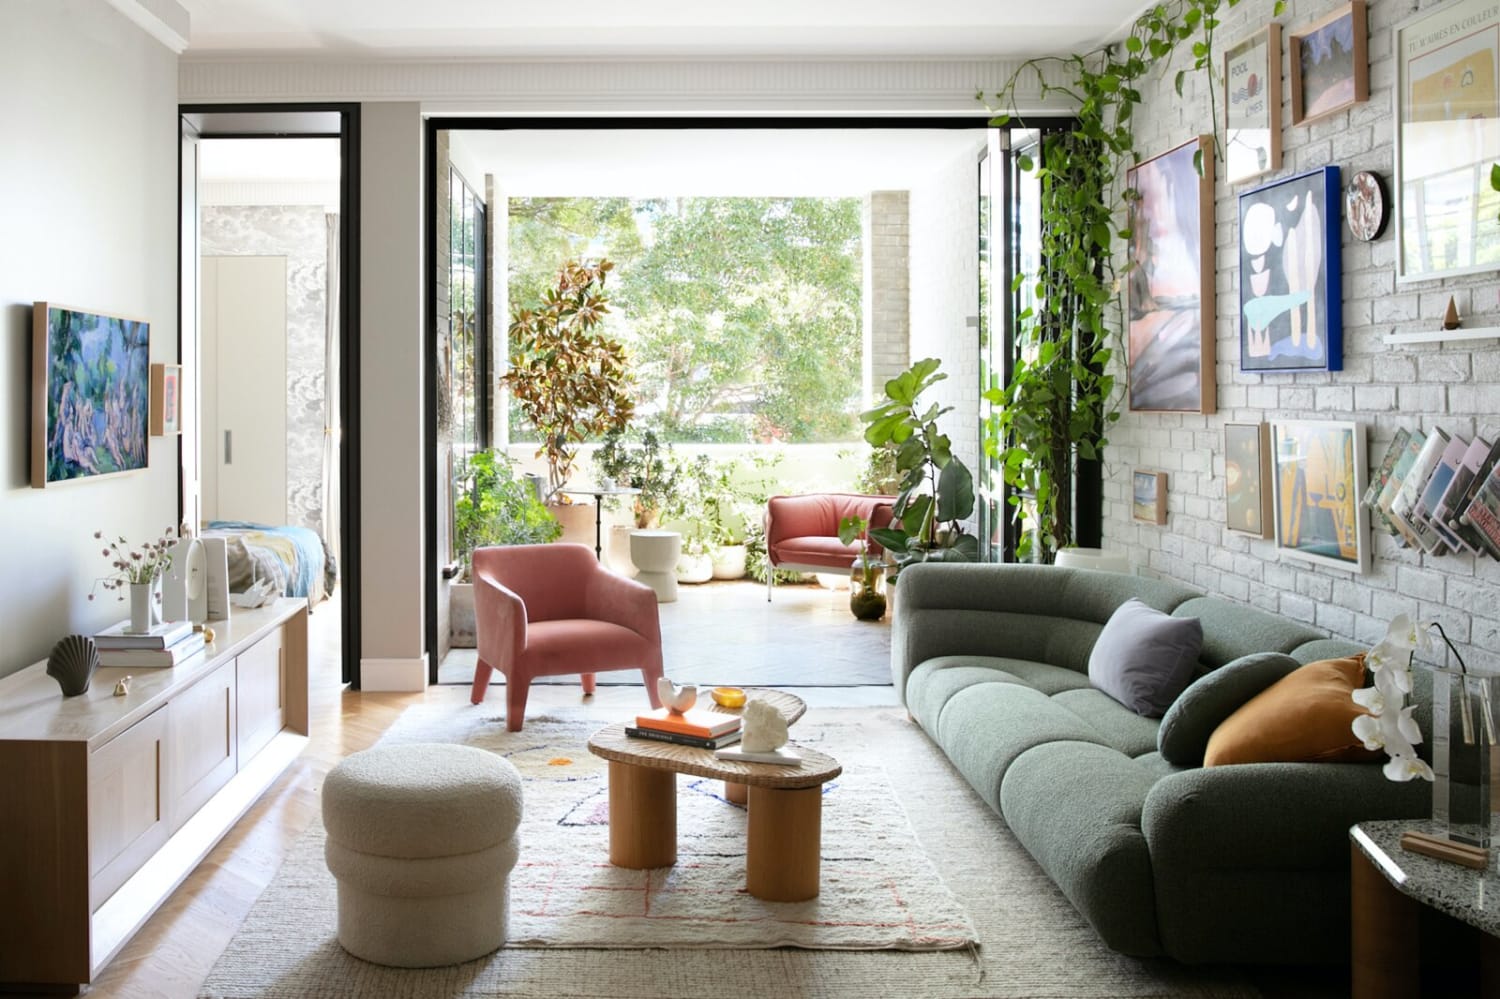 My House: Australian Stylist Jono Fleming Curates an Ever-Changing, Art-Filled Home